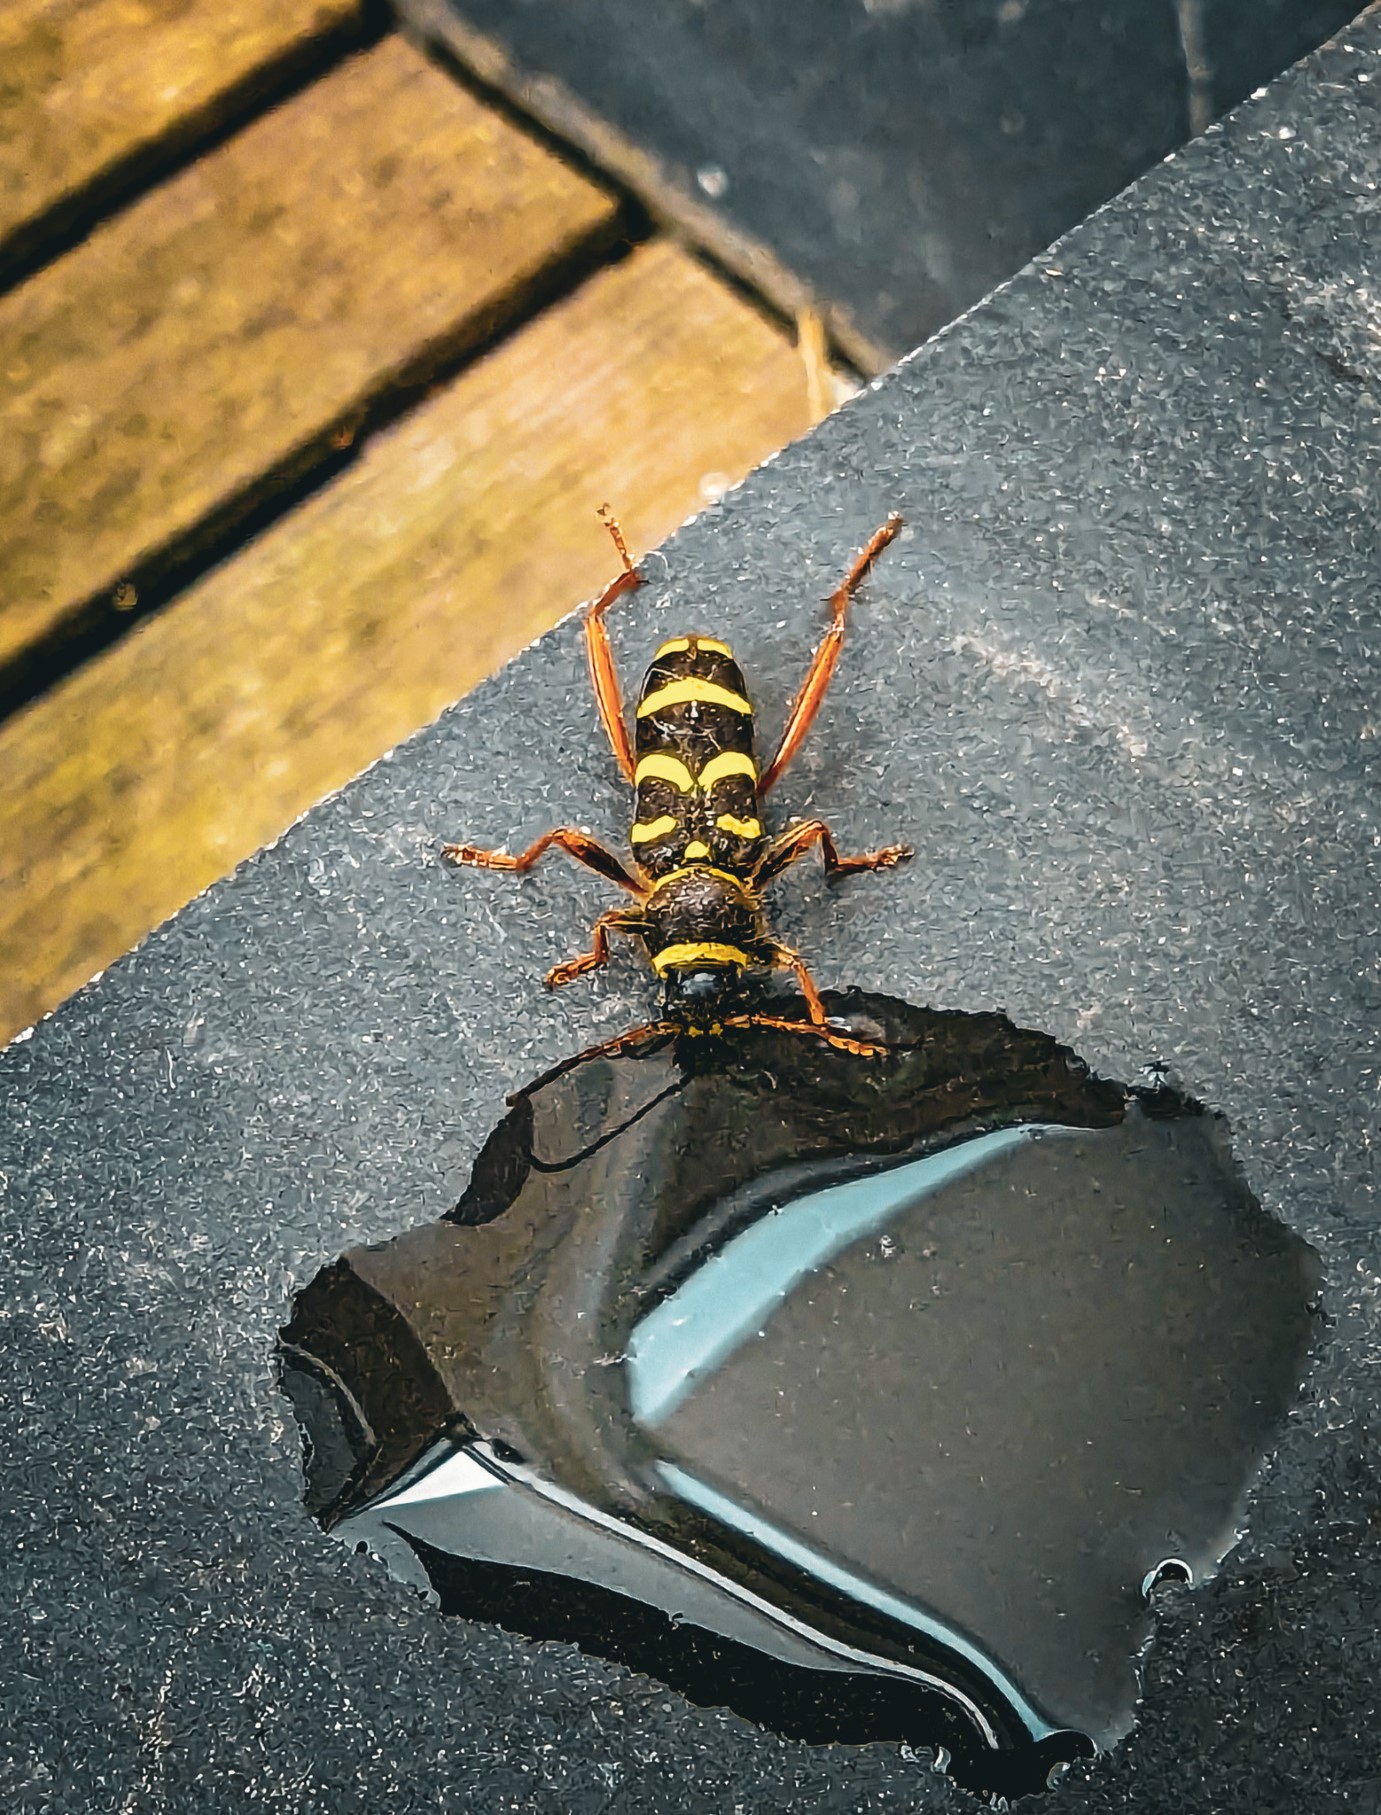 The wasp beetle is a wasp-mimicking longhorn beetle.